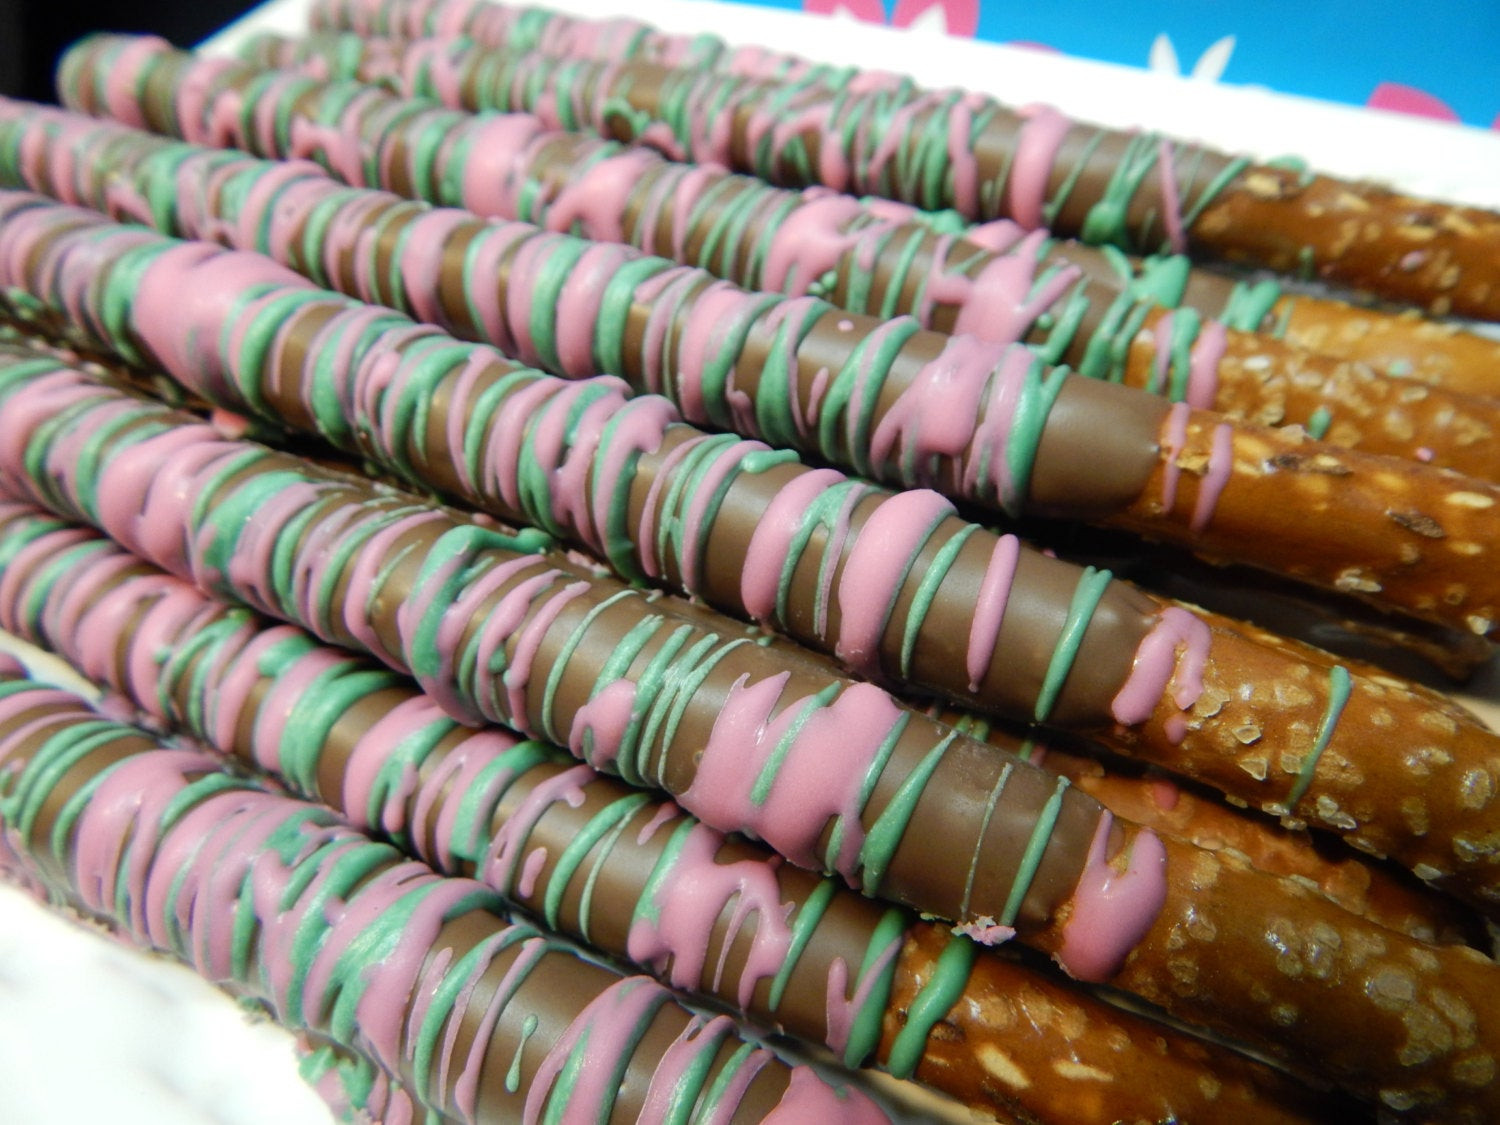 Gourmet Chocolate Pretzels
 Gourmet Chocolate Covered Pretzel Rods with Pink & Green